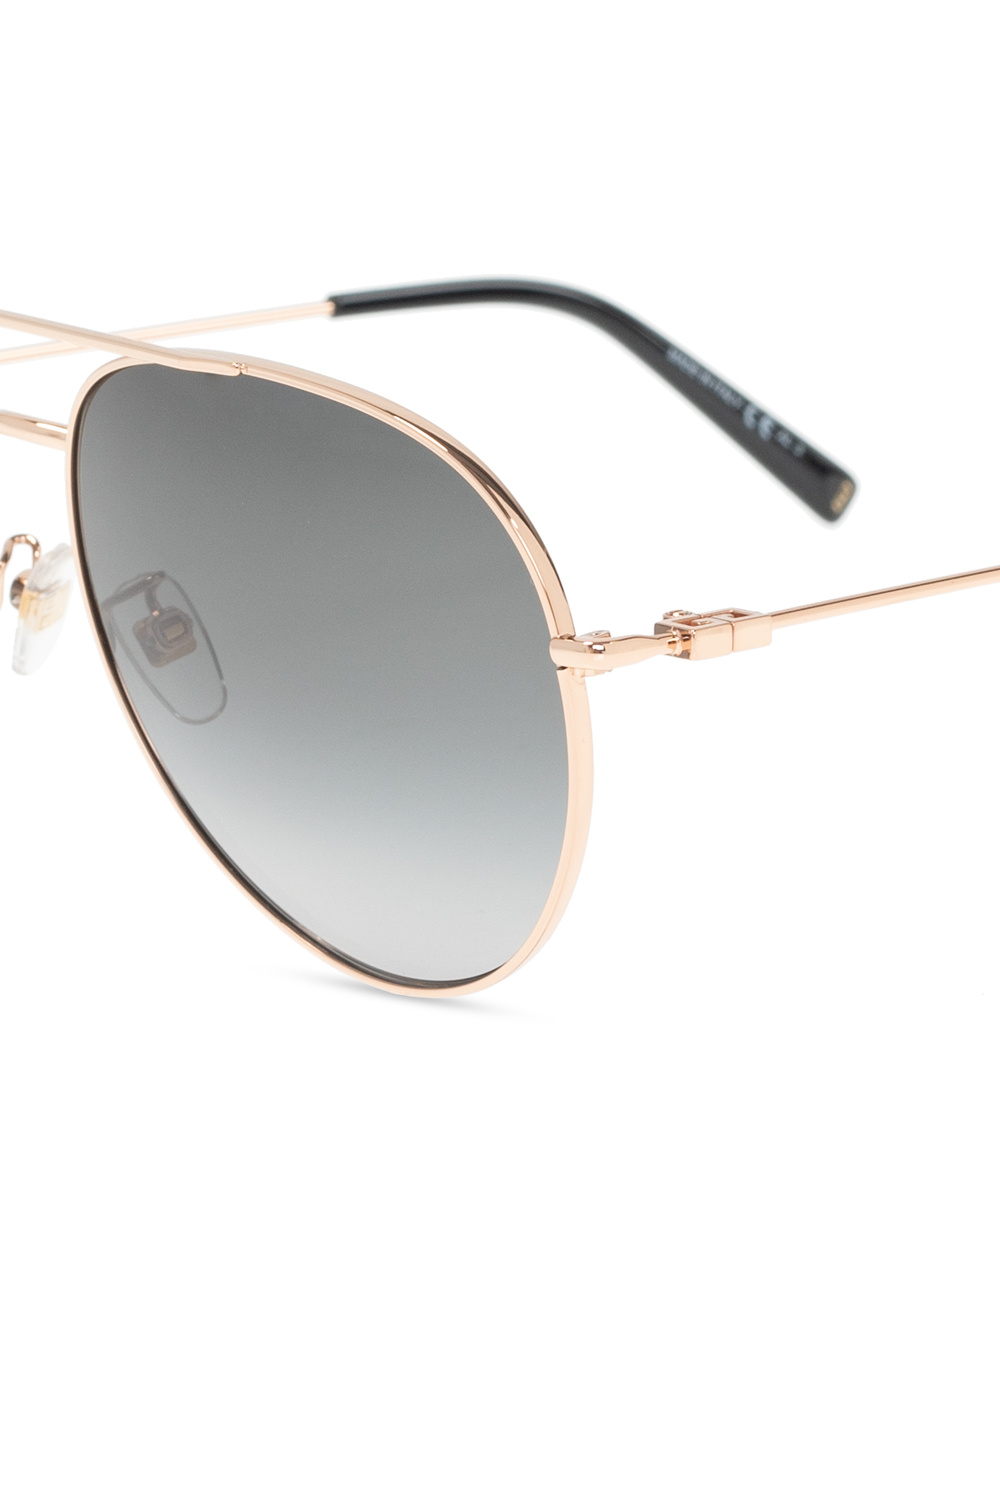 Givenchy Sunglasses with logo